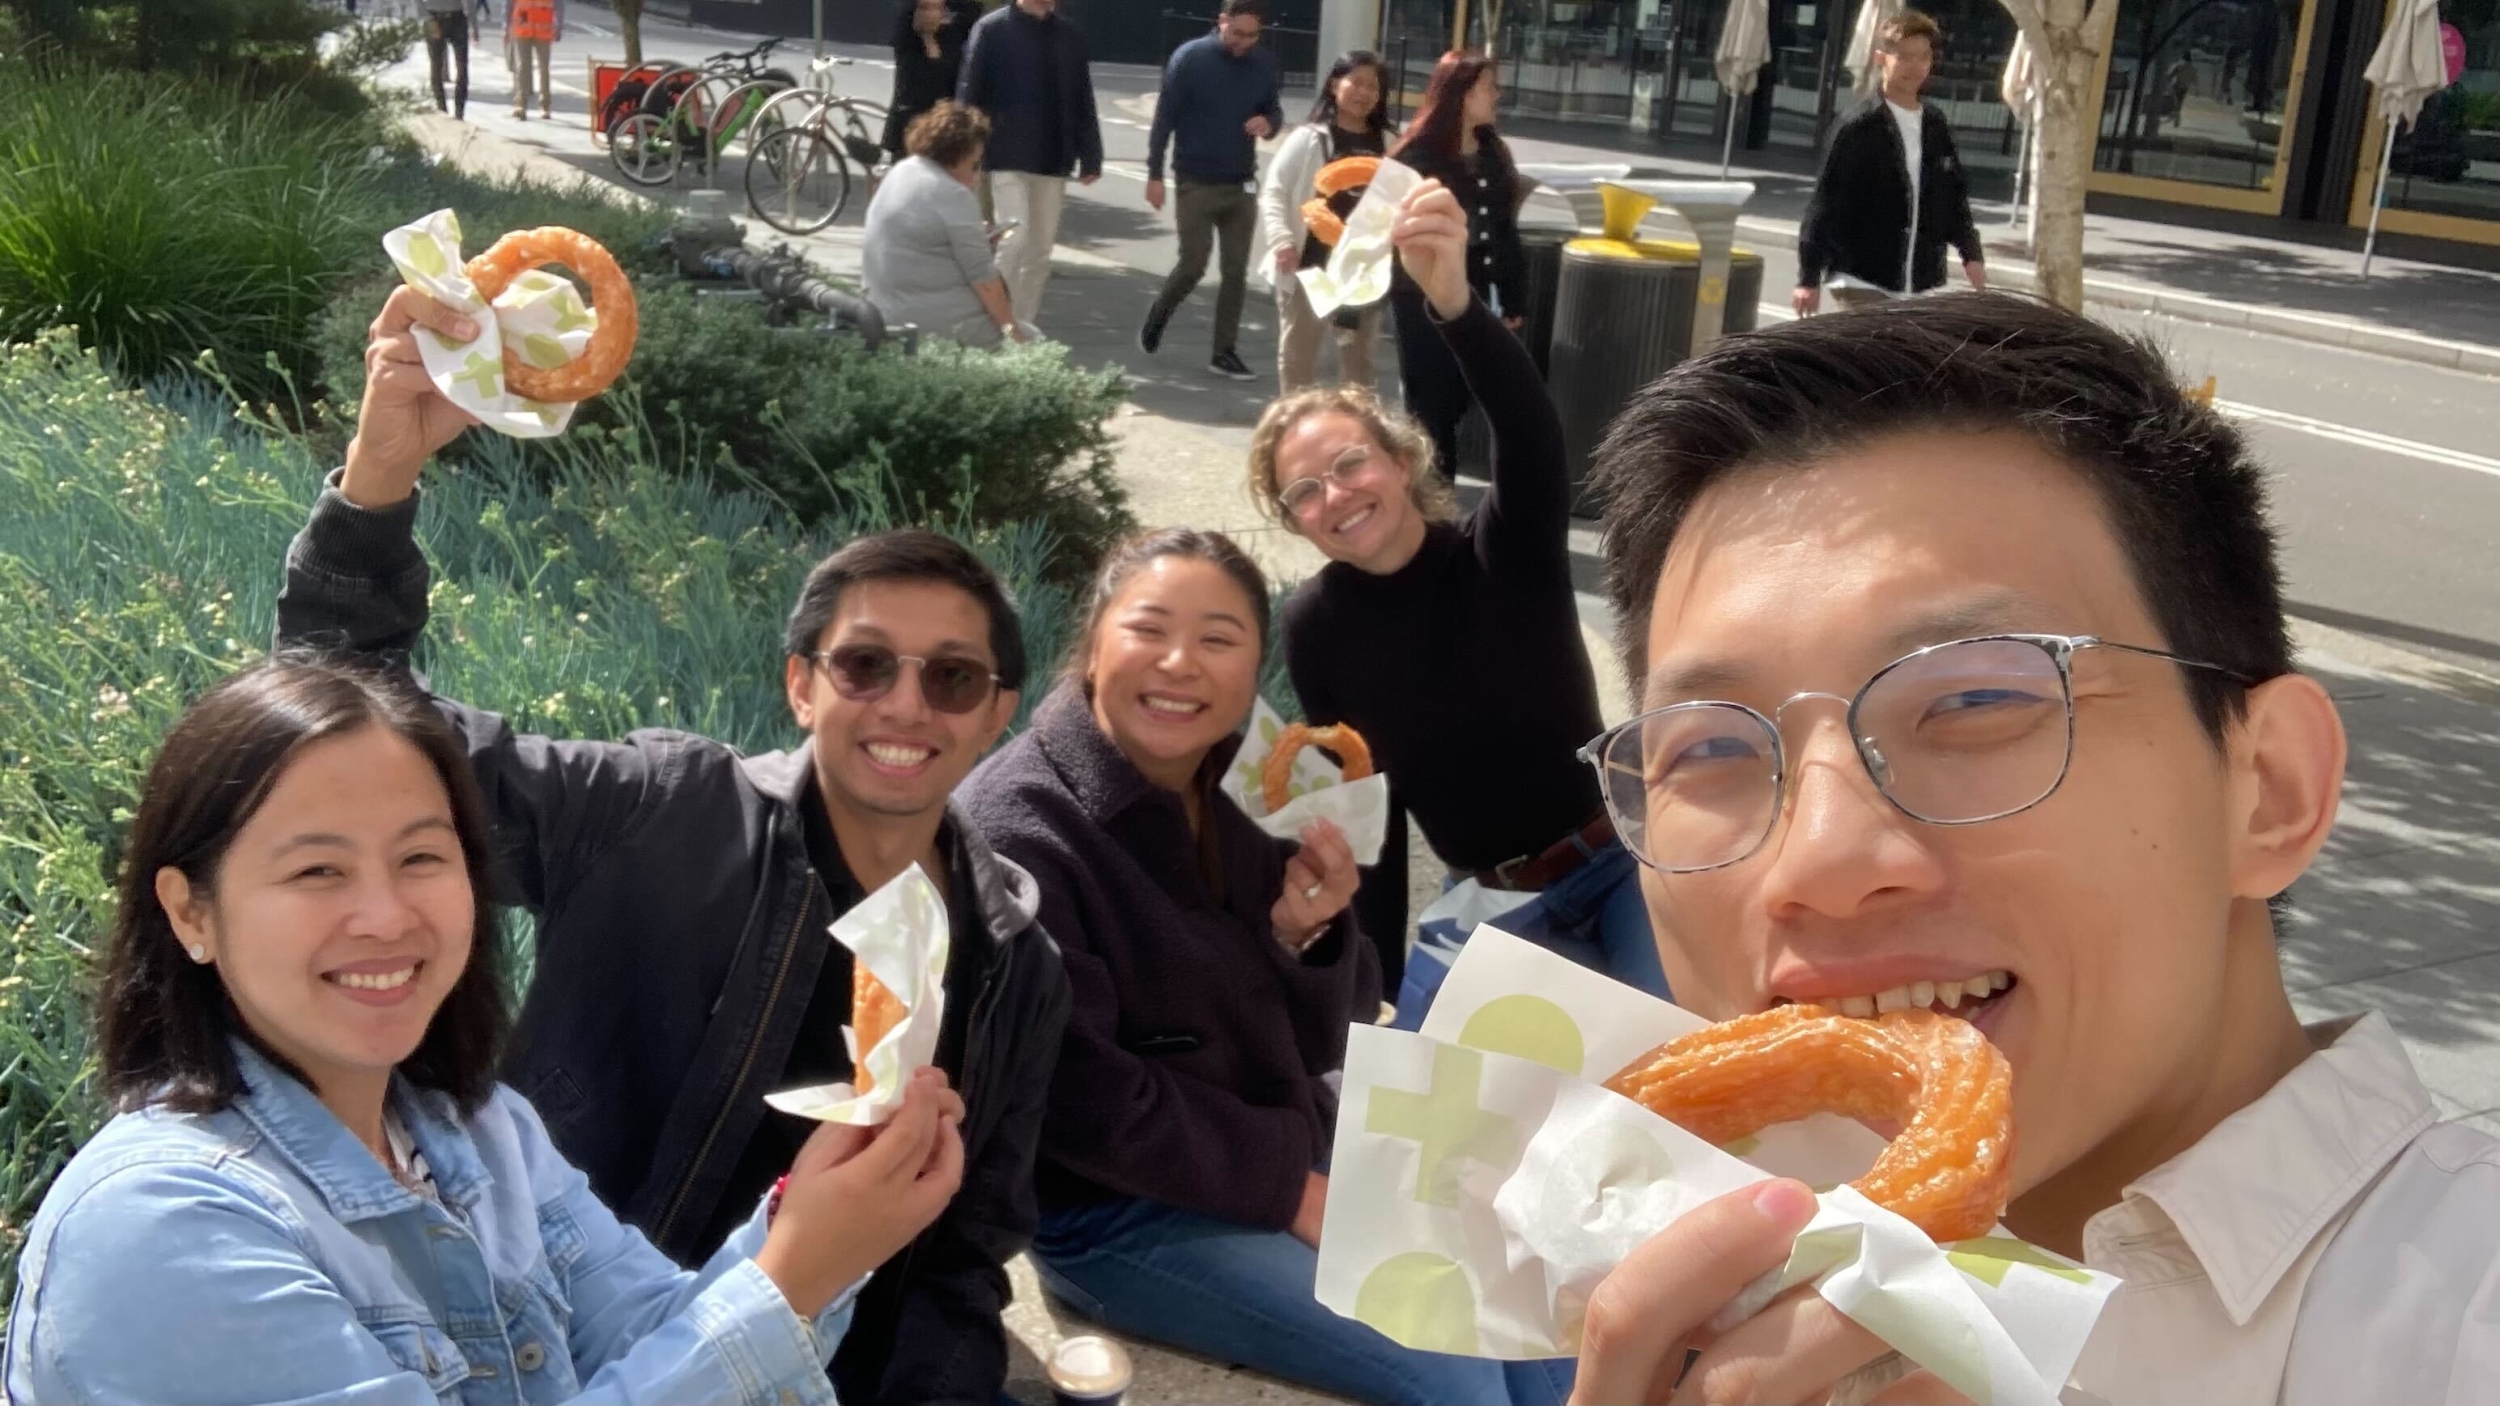 A selfie taken of a group of mx51 employees smiling and holding large cinnamon donuts.